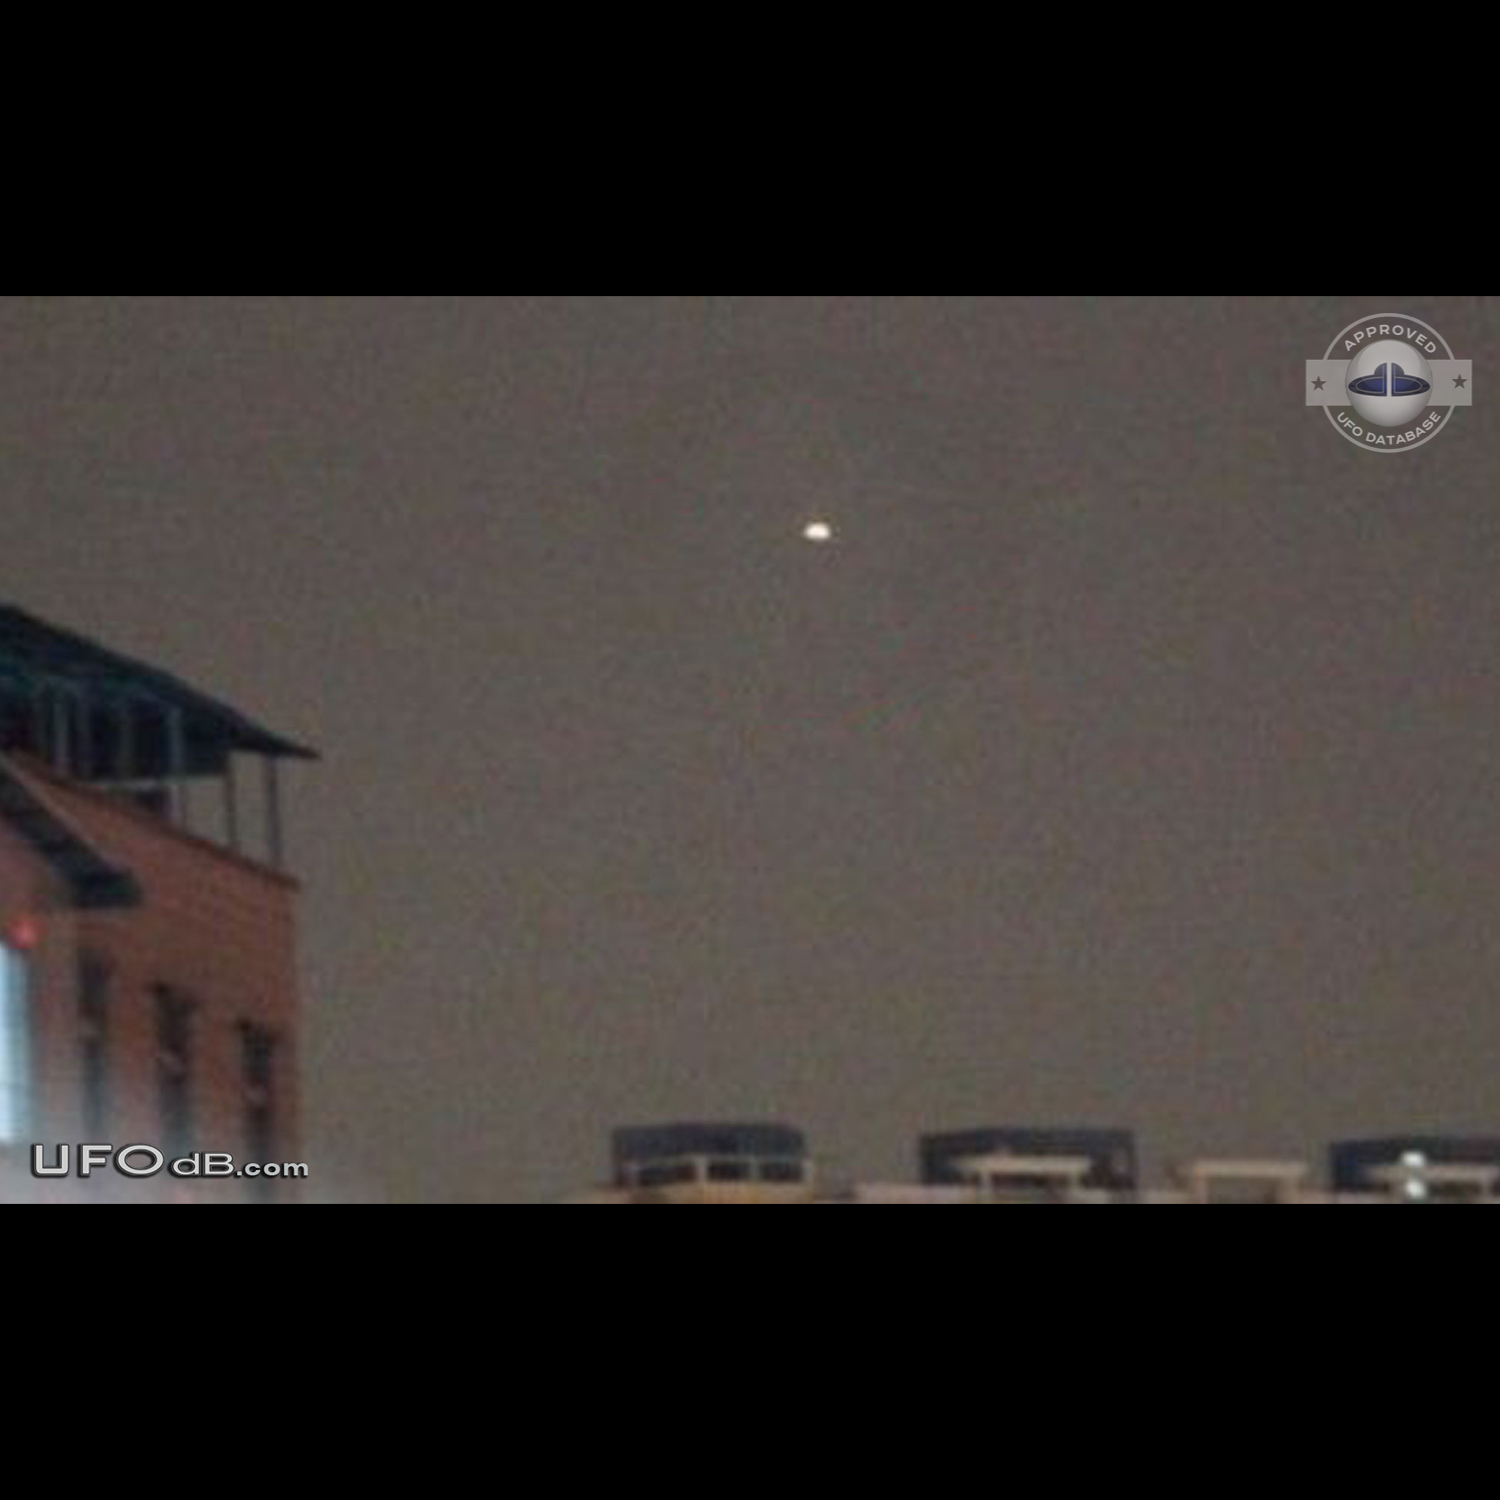 China Newspaper say [The Aliens are coming] after UFO sightings 2010 UFO Picture #469-1